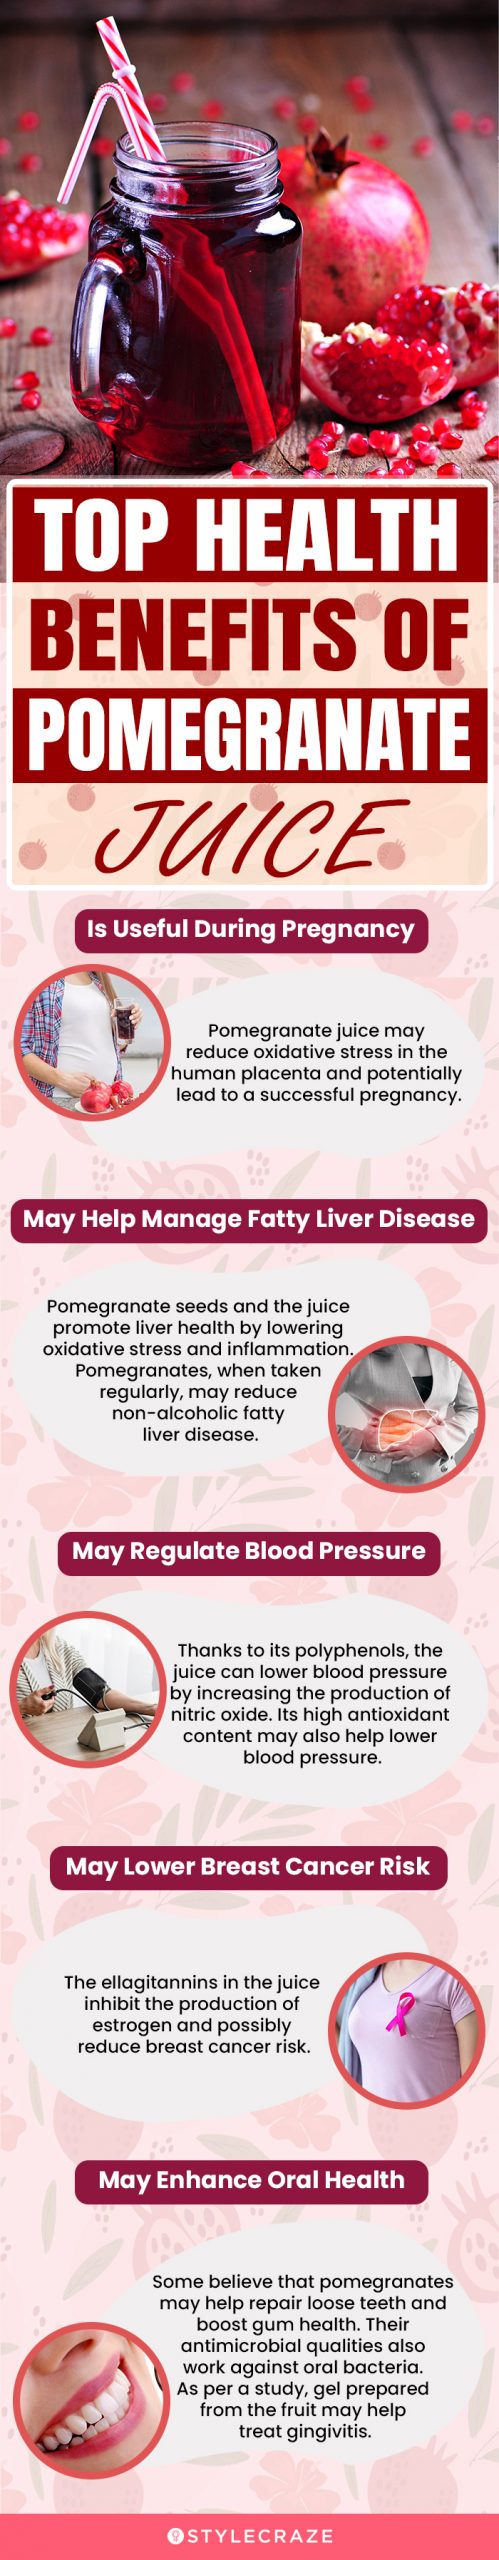 top health benefits of pomegranate juice(infographic)